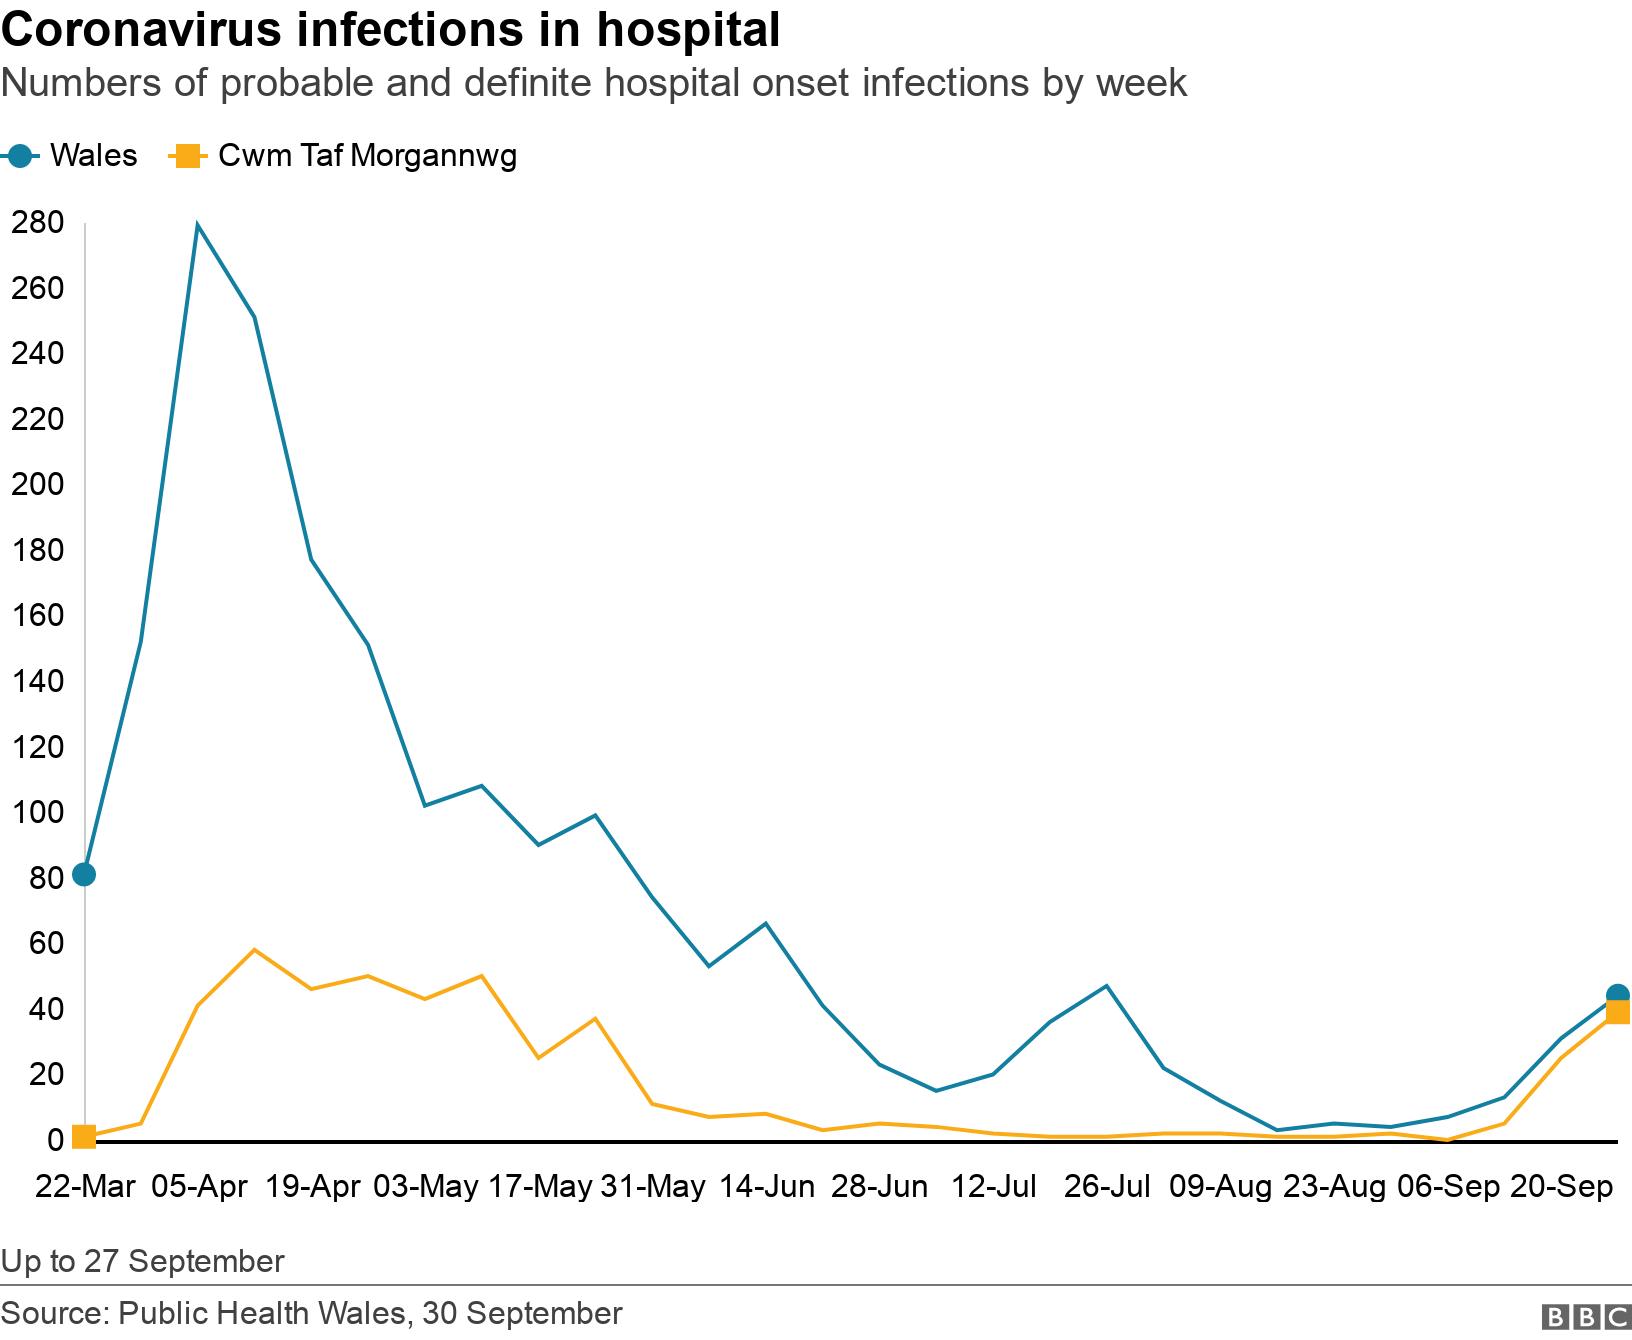 Coronavirus infections in hospital. Numbers of probable and definite hospital onset infections by week. Up to 27 September.